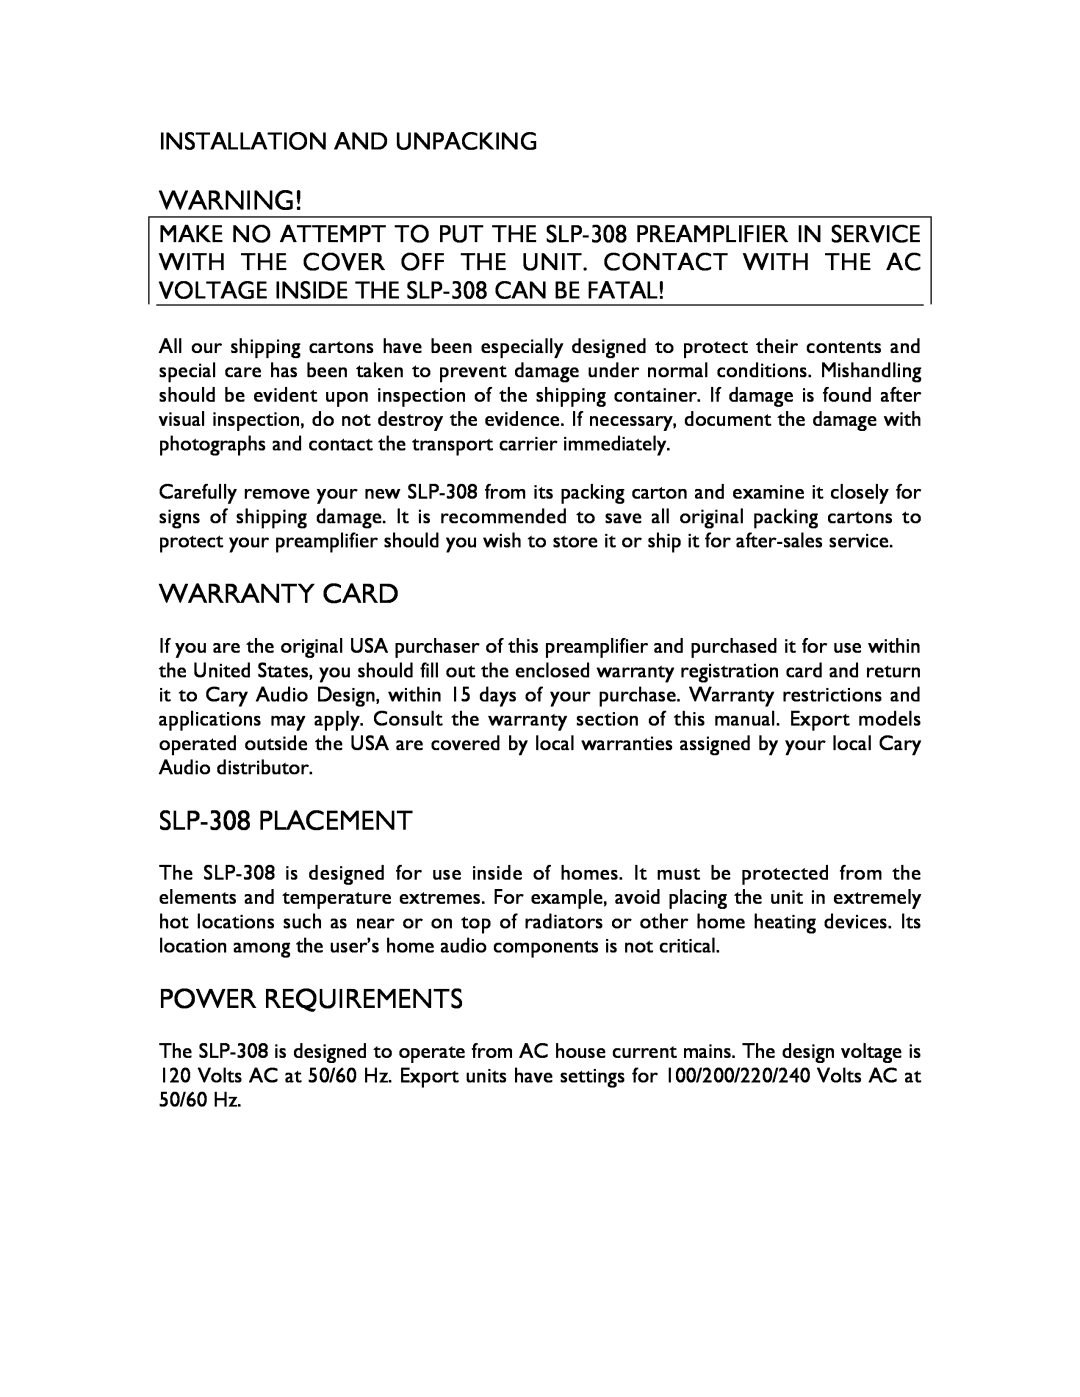 Cary Audio Design installation manual Warranty Card, SLP-308PLACEMENT, Power Requirements, Installation And Unpacking 